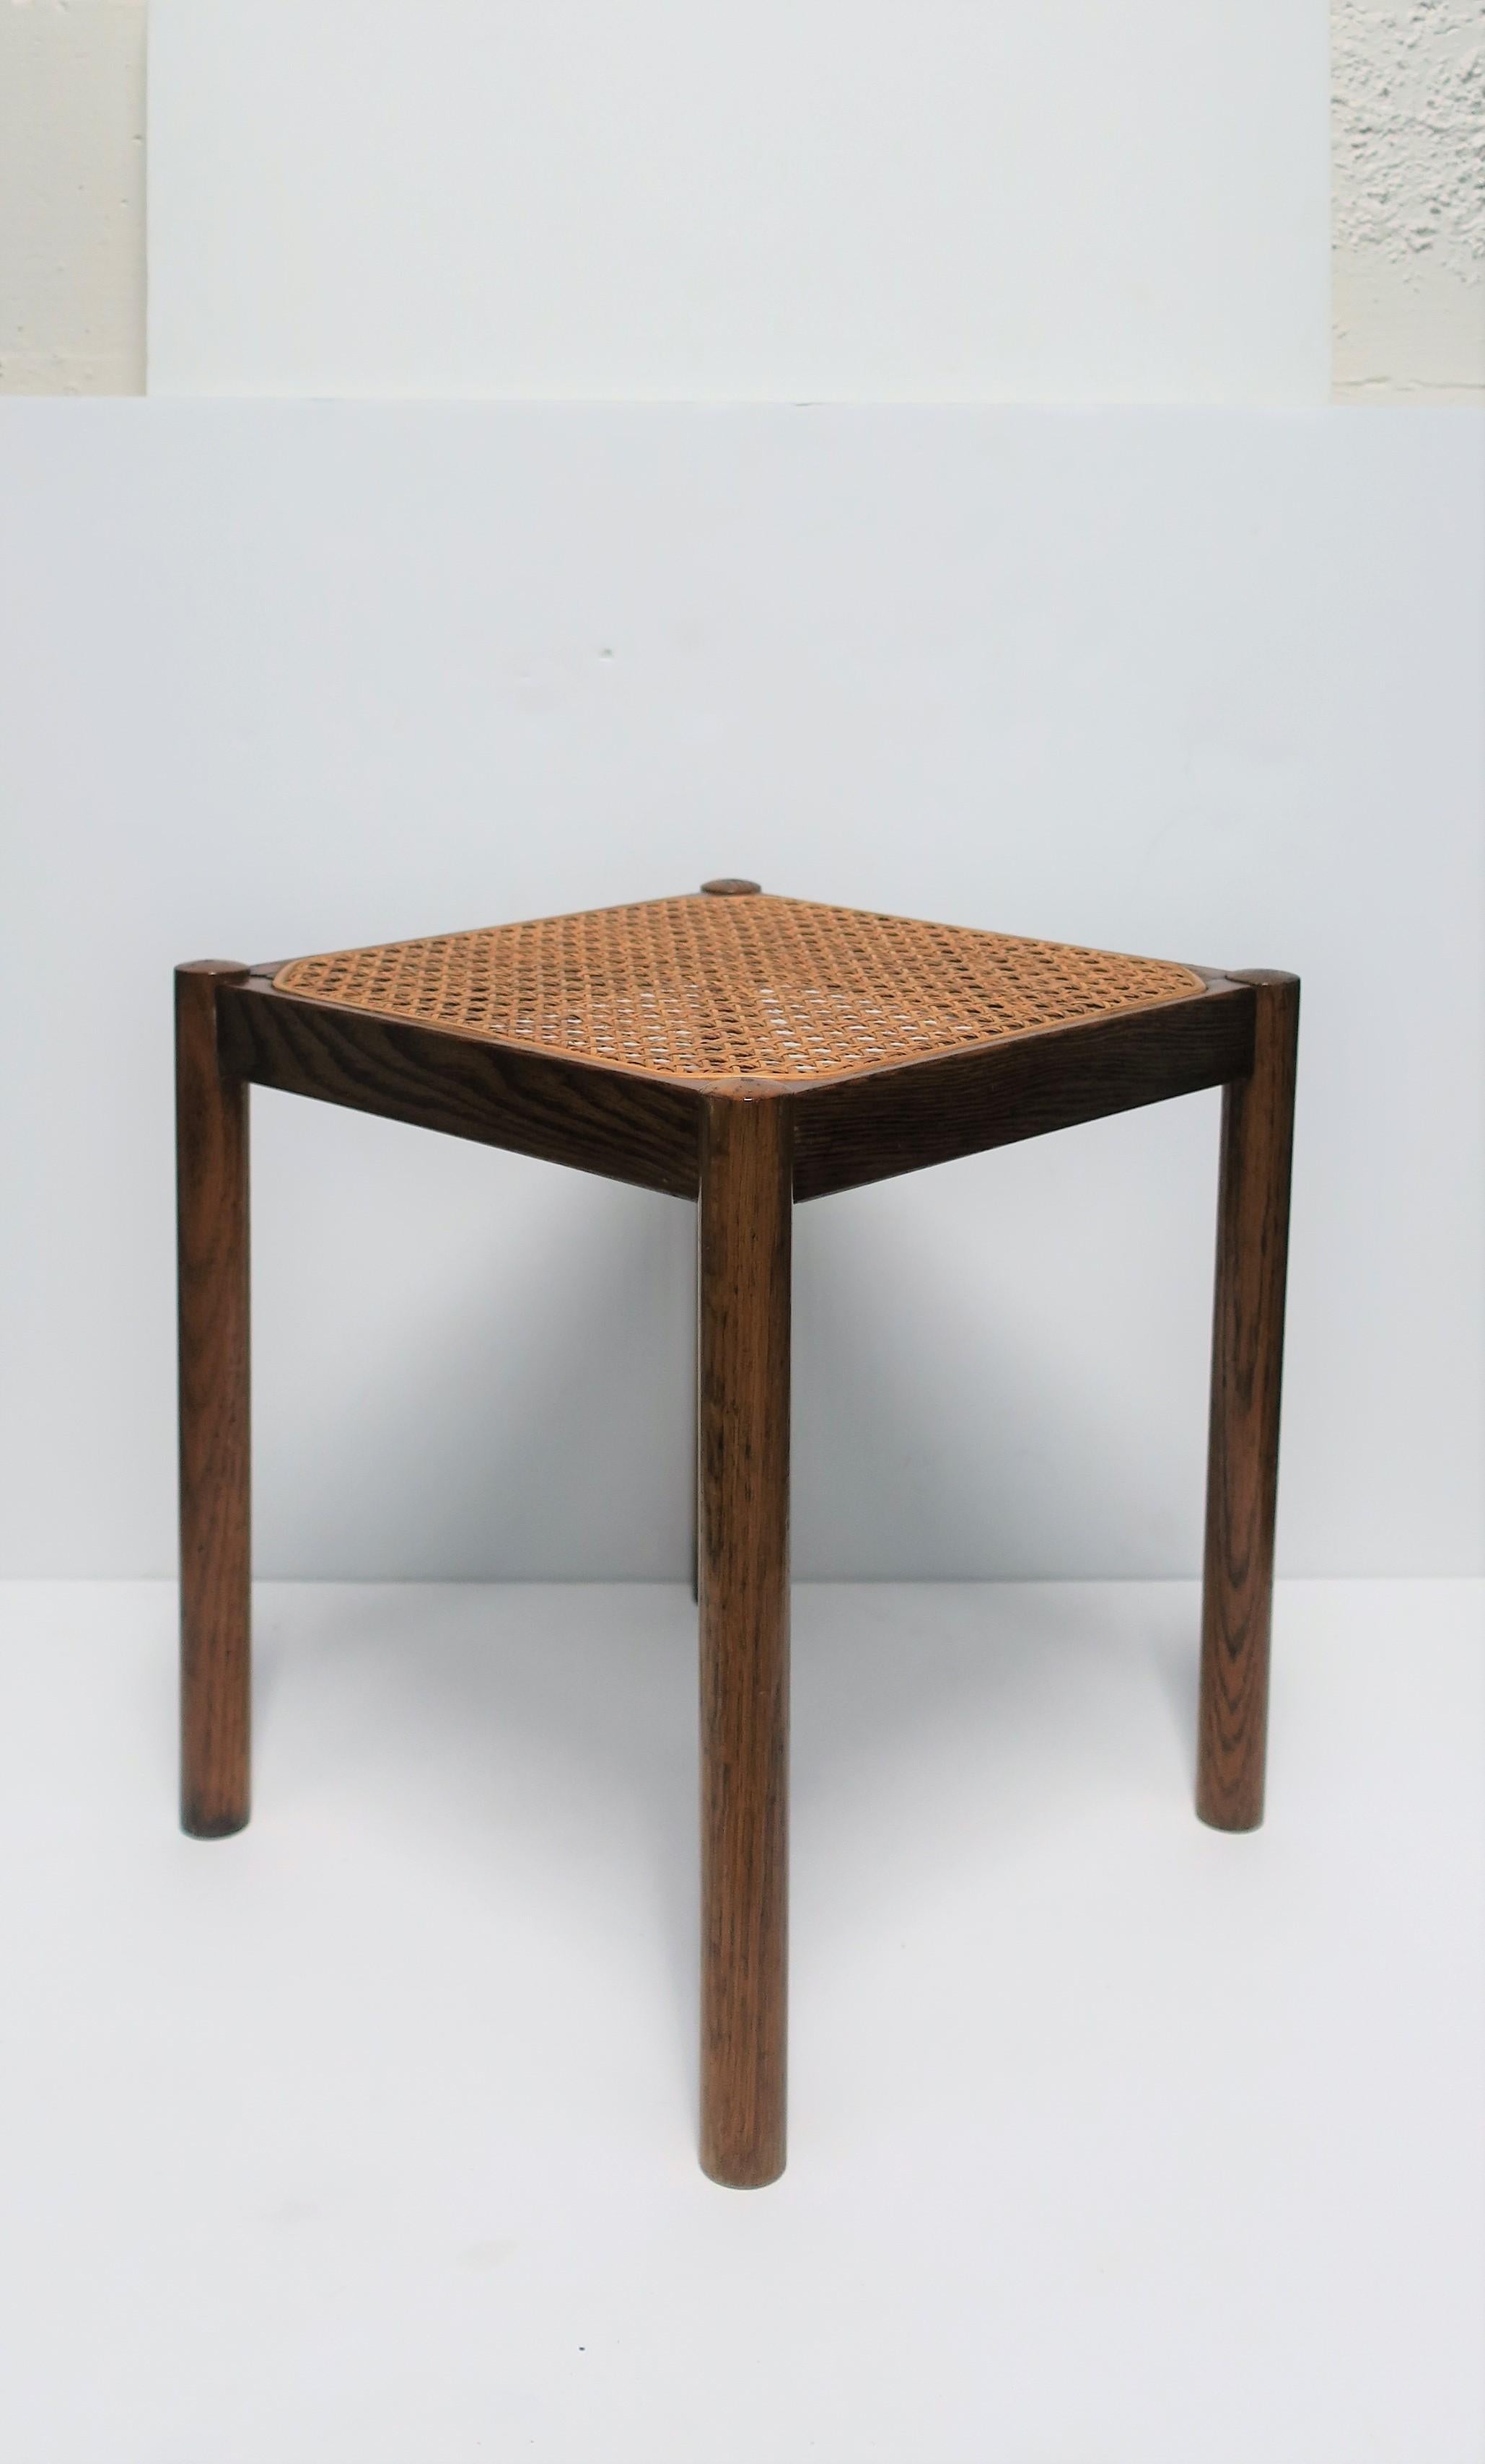 20th Century Cane and Wood Side or End Table